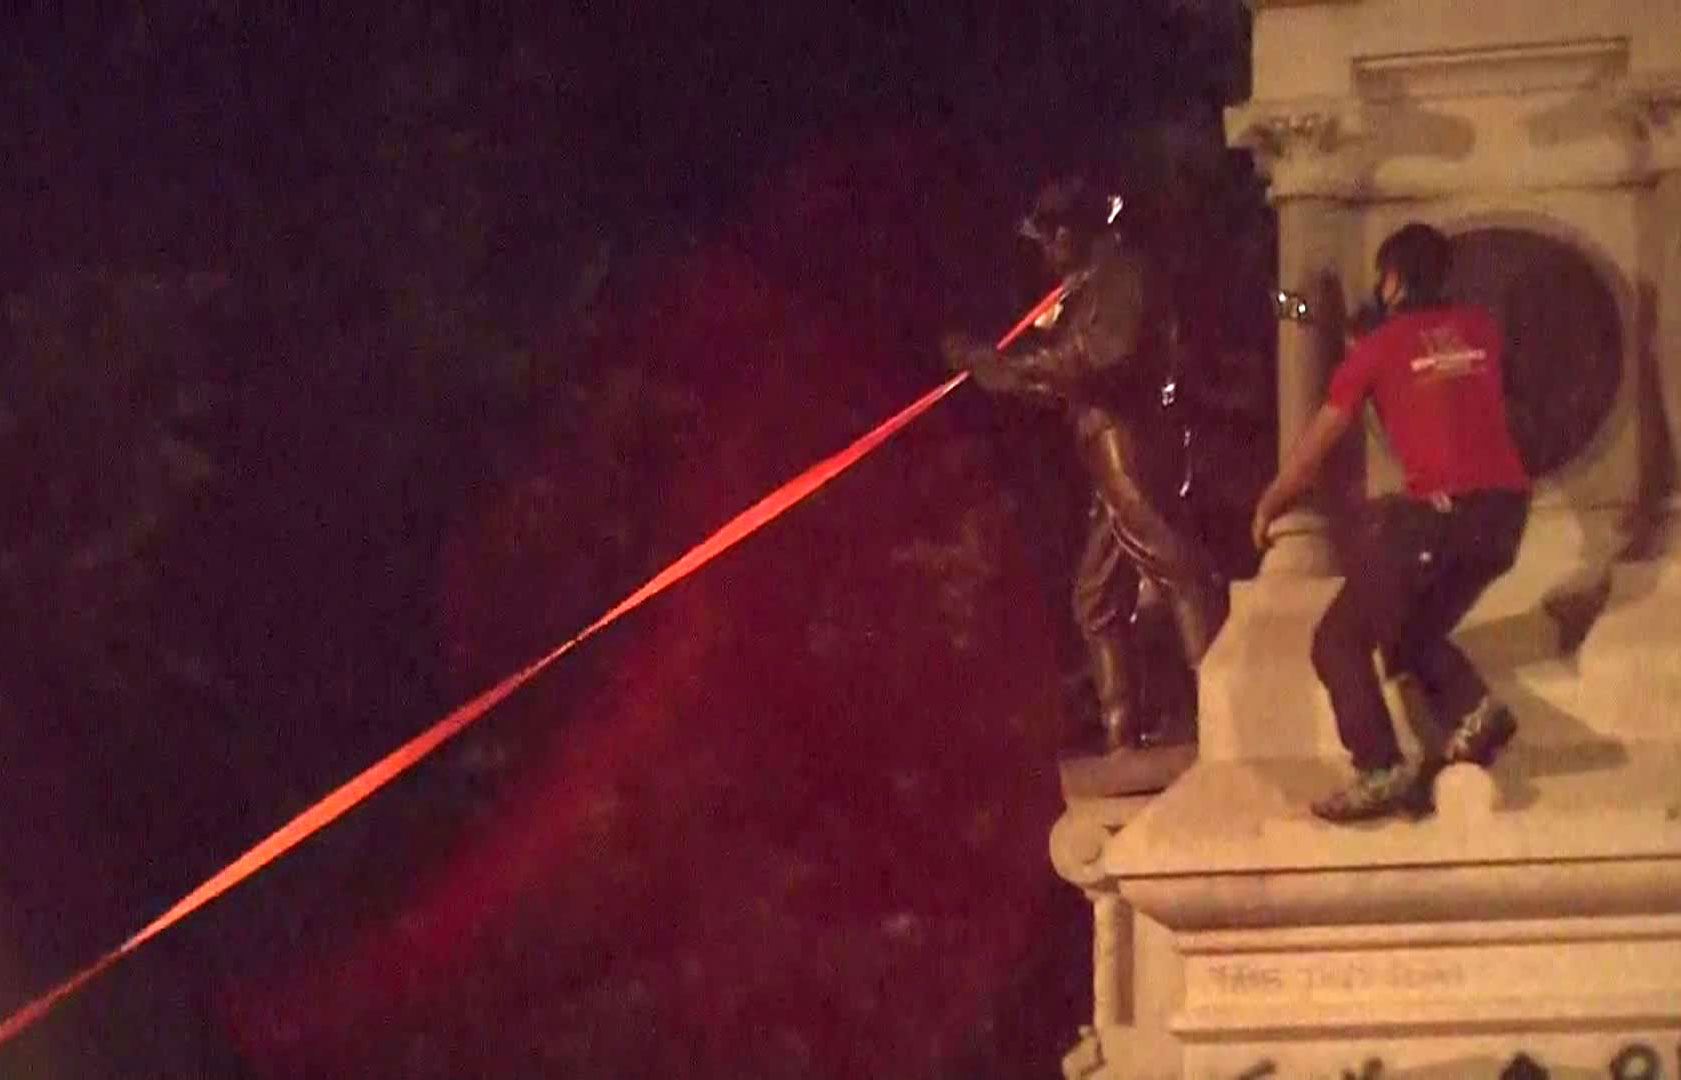 Protesters pull a statue down from a Confederate monument on Friday night in Raleigh, North Carolina.